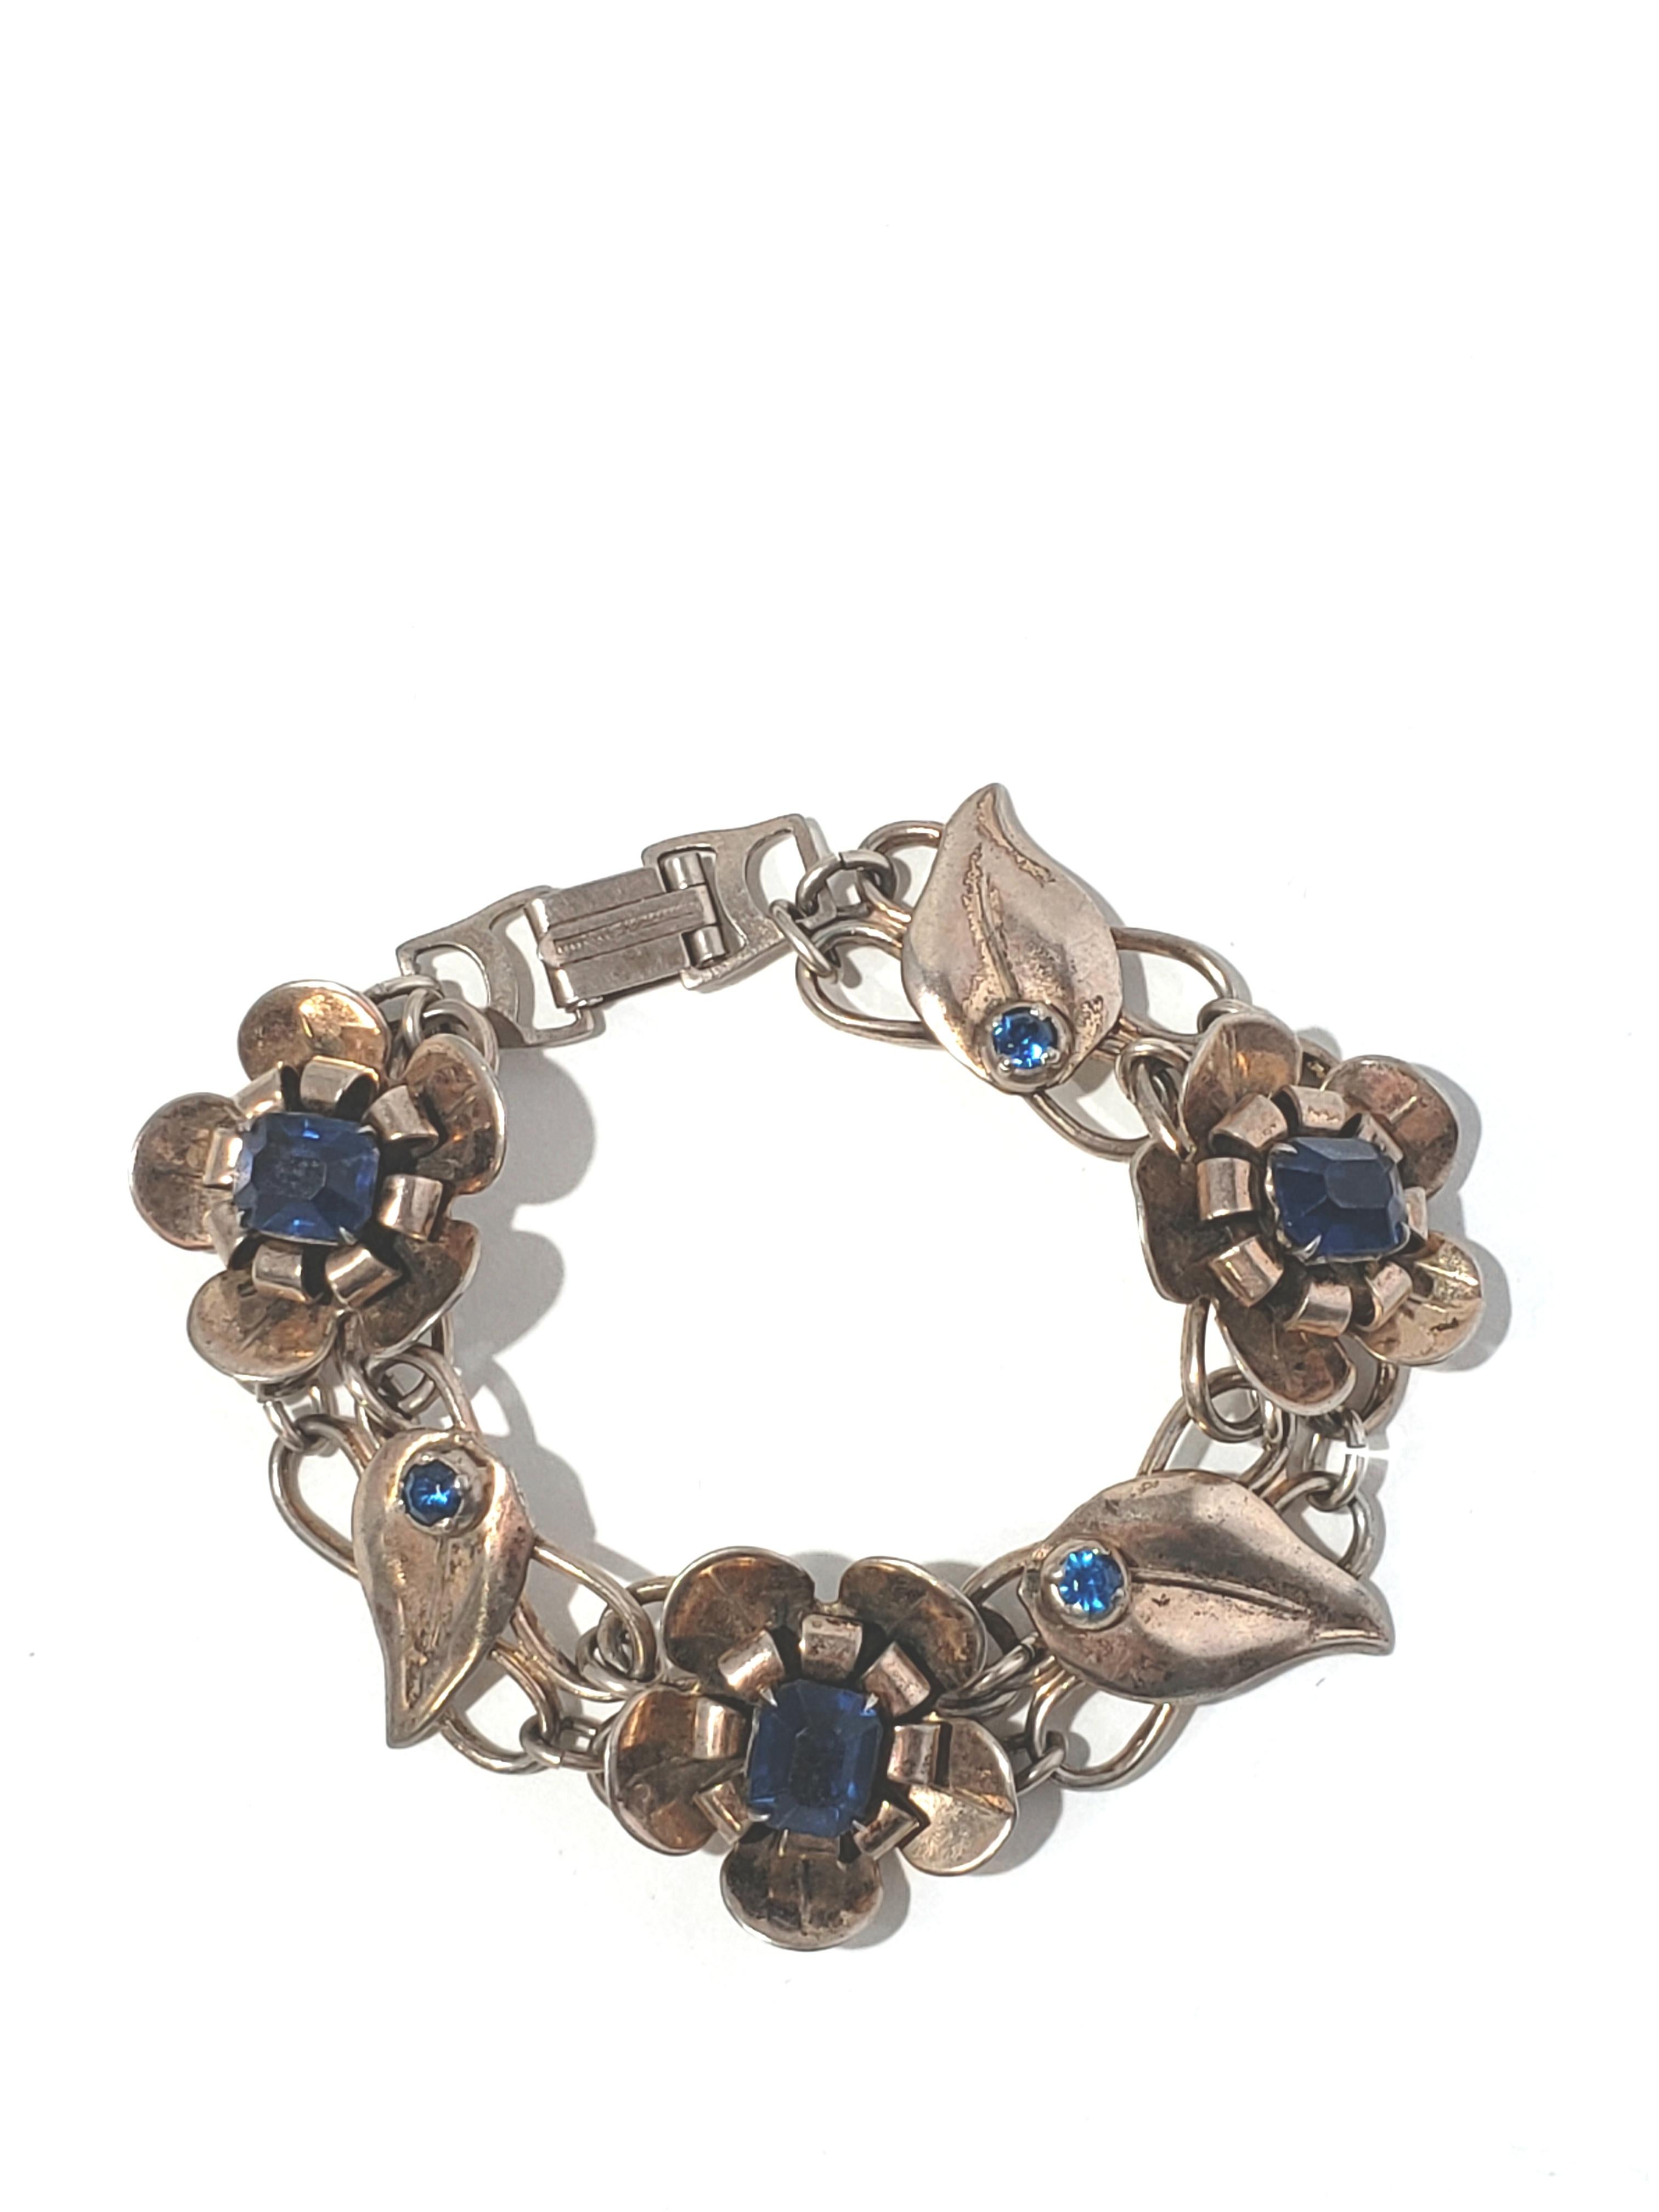 Vintage Sterling Silver Vermeil Flower Link Blue Stone Bracelet

This is a lovely Sterling Silver Vermeil Flower Link Bracelet with alternating blue stones.

Measurements: Bracelet measures 7 1/2 inches. Width is 7/8 inches.

Weight: 28.0 g / 18.0